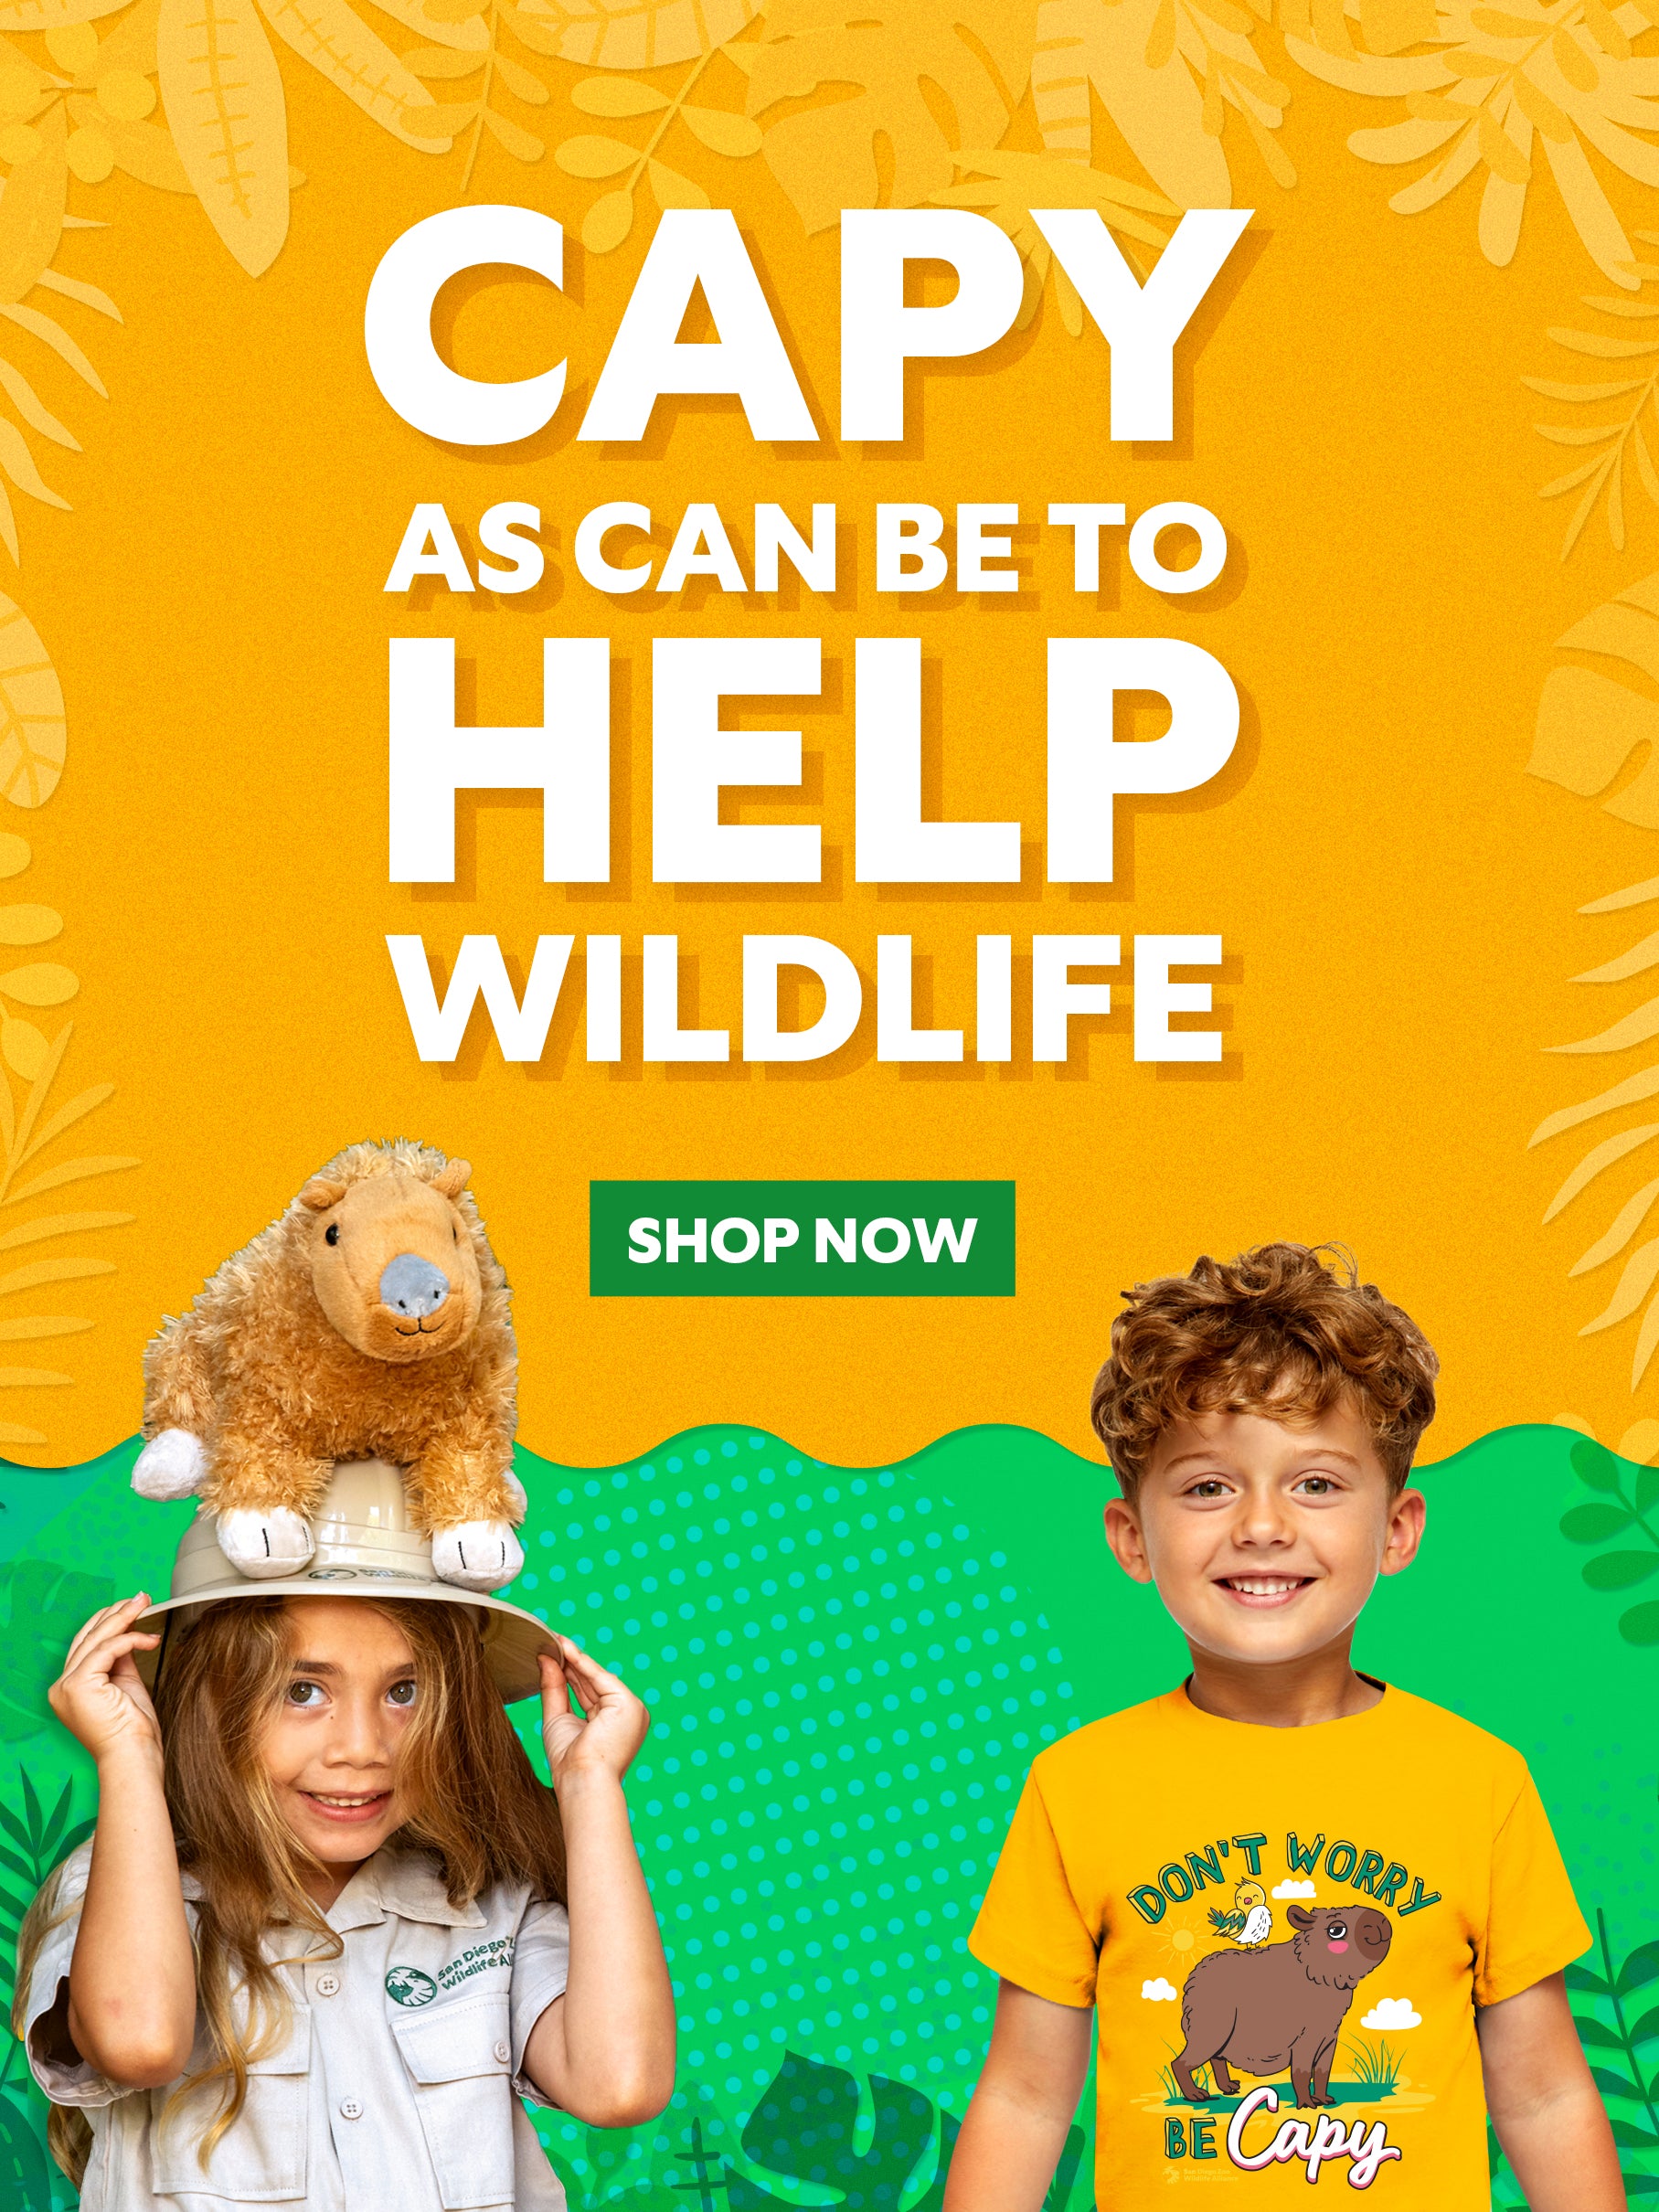 Support Wildlife Conservation with our Capybara Merchandise Collection